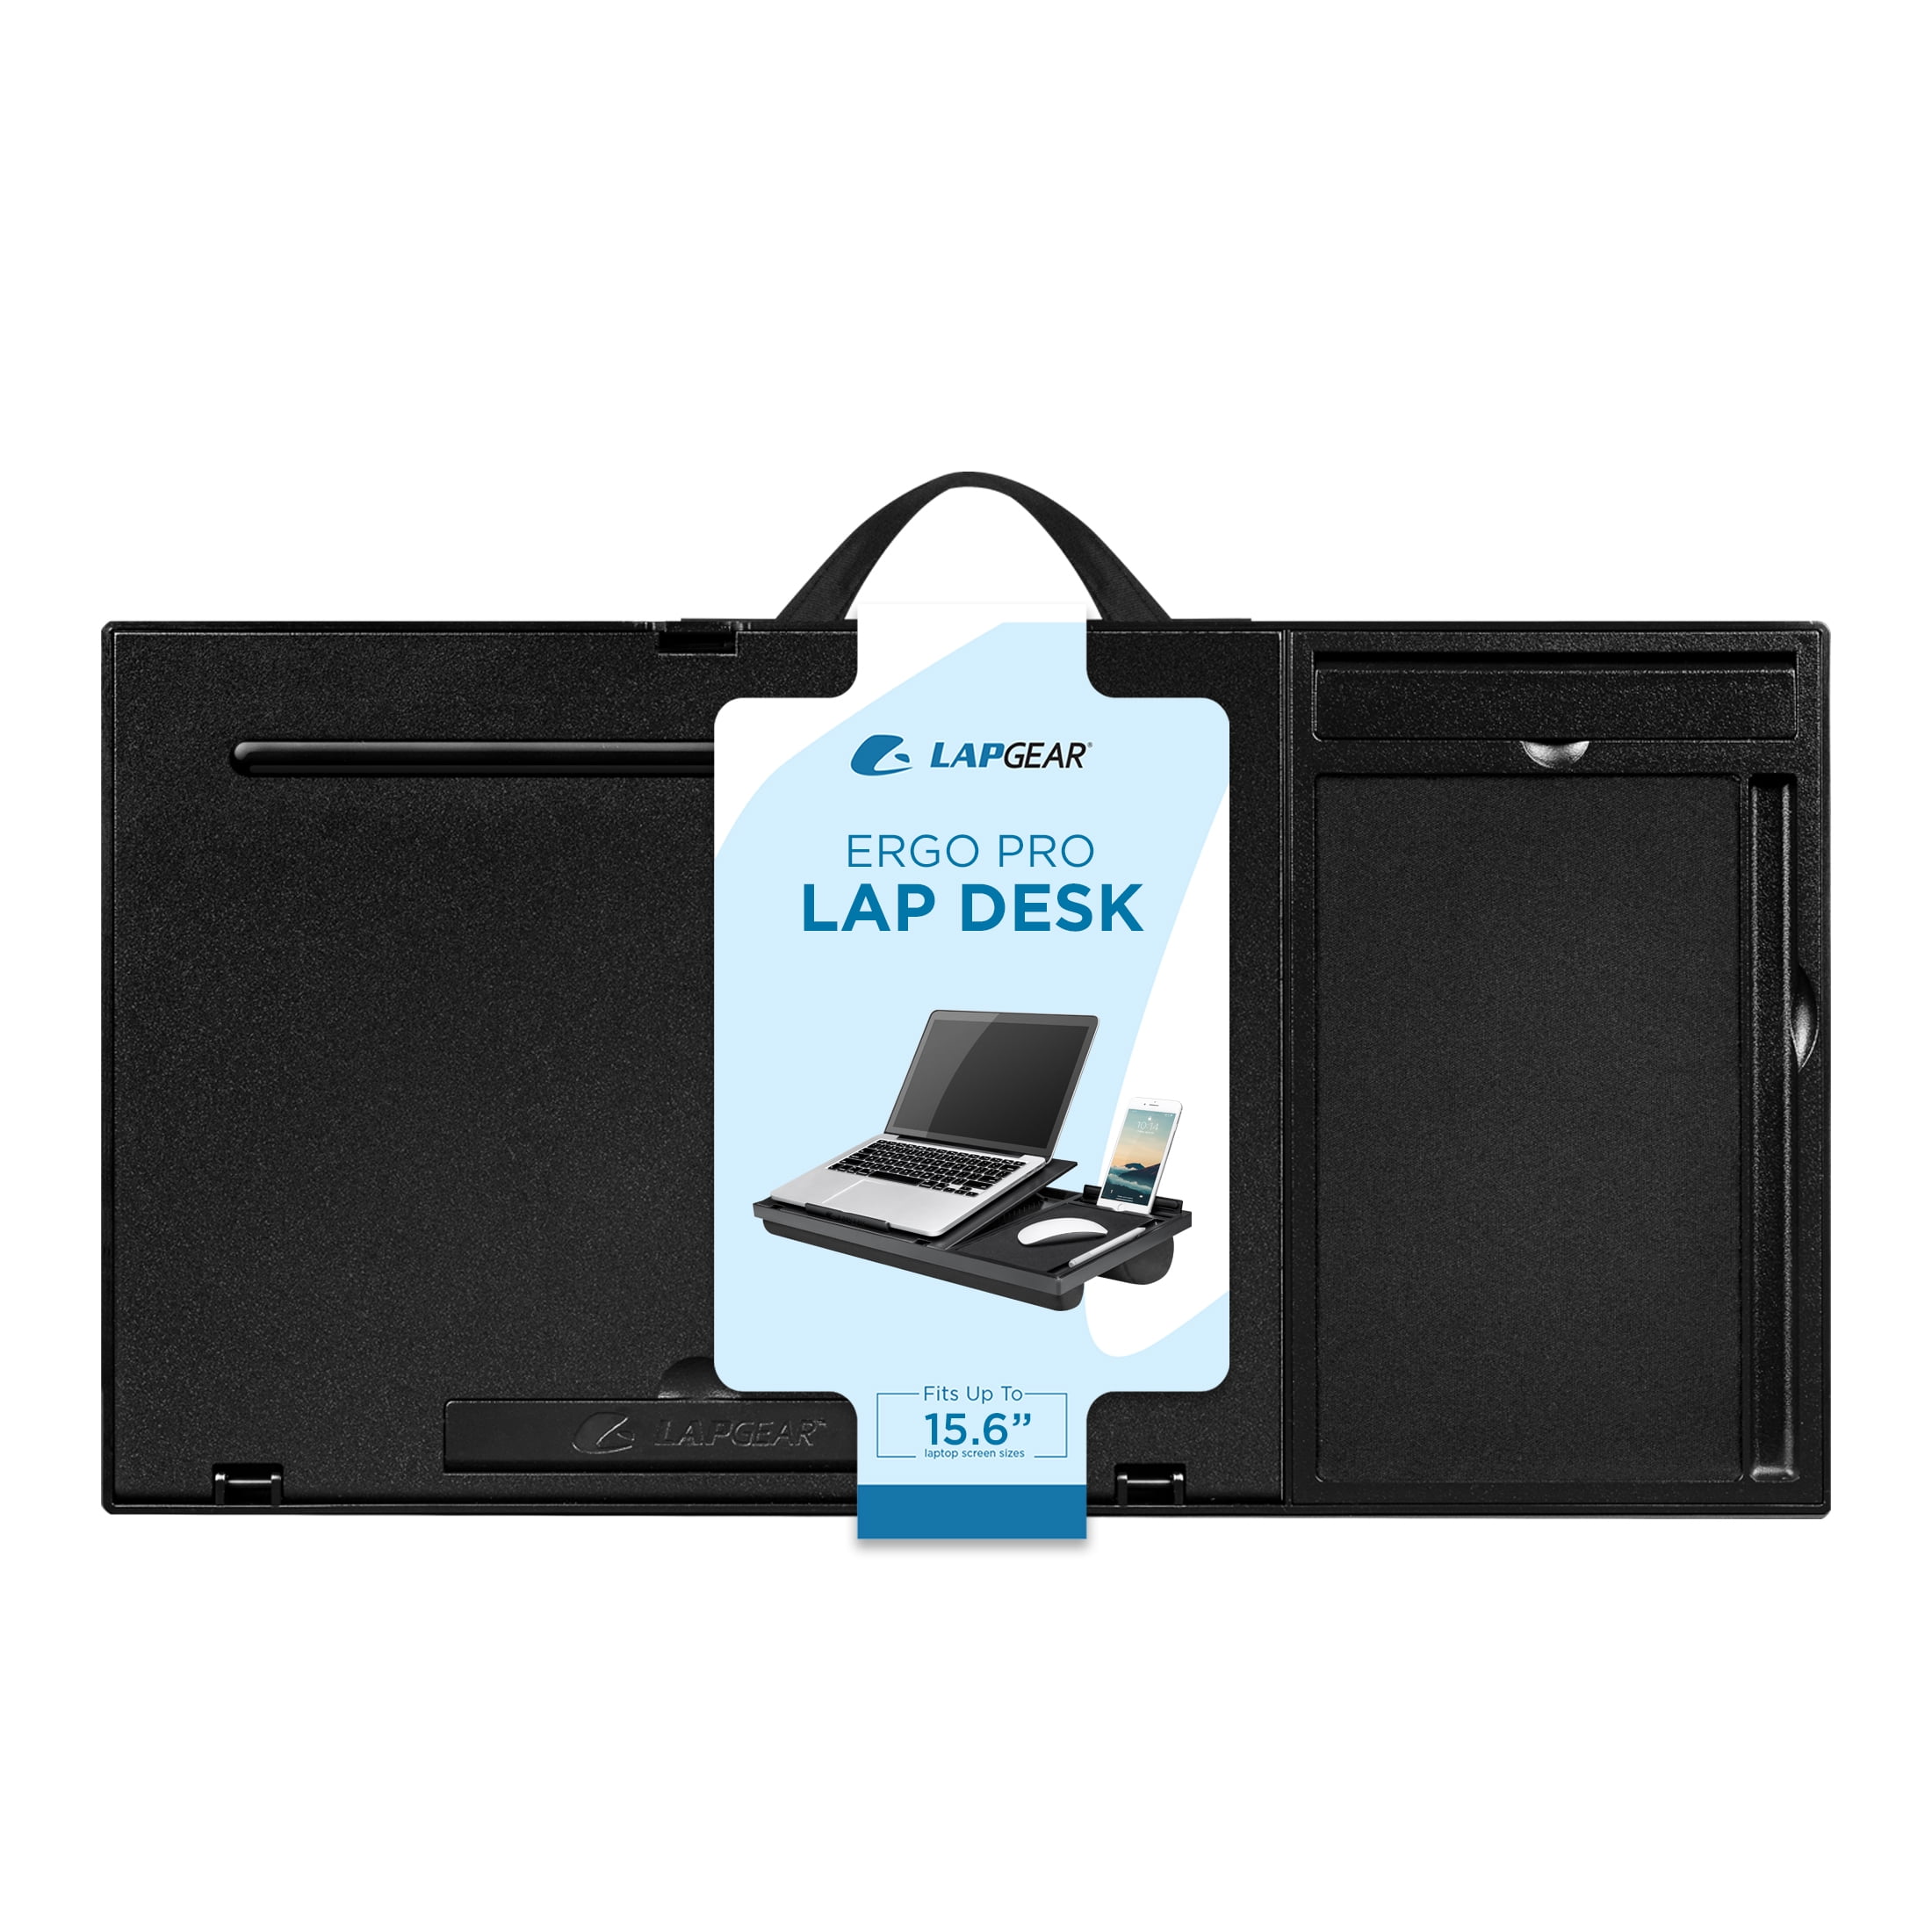 LAPGEAR Compact Lap Desk - Black - Fits up to 15 Inch Laptops - Style No.  43108